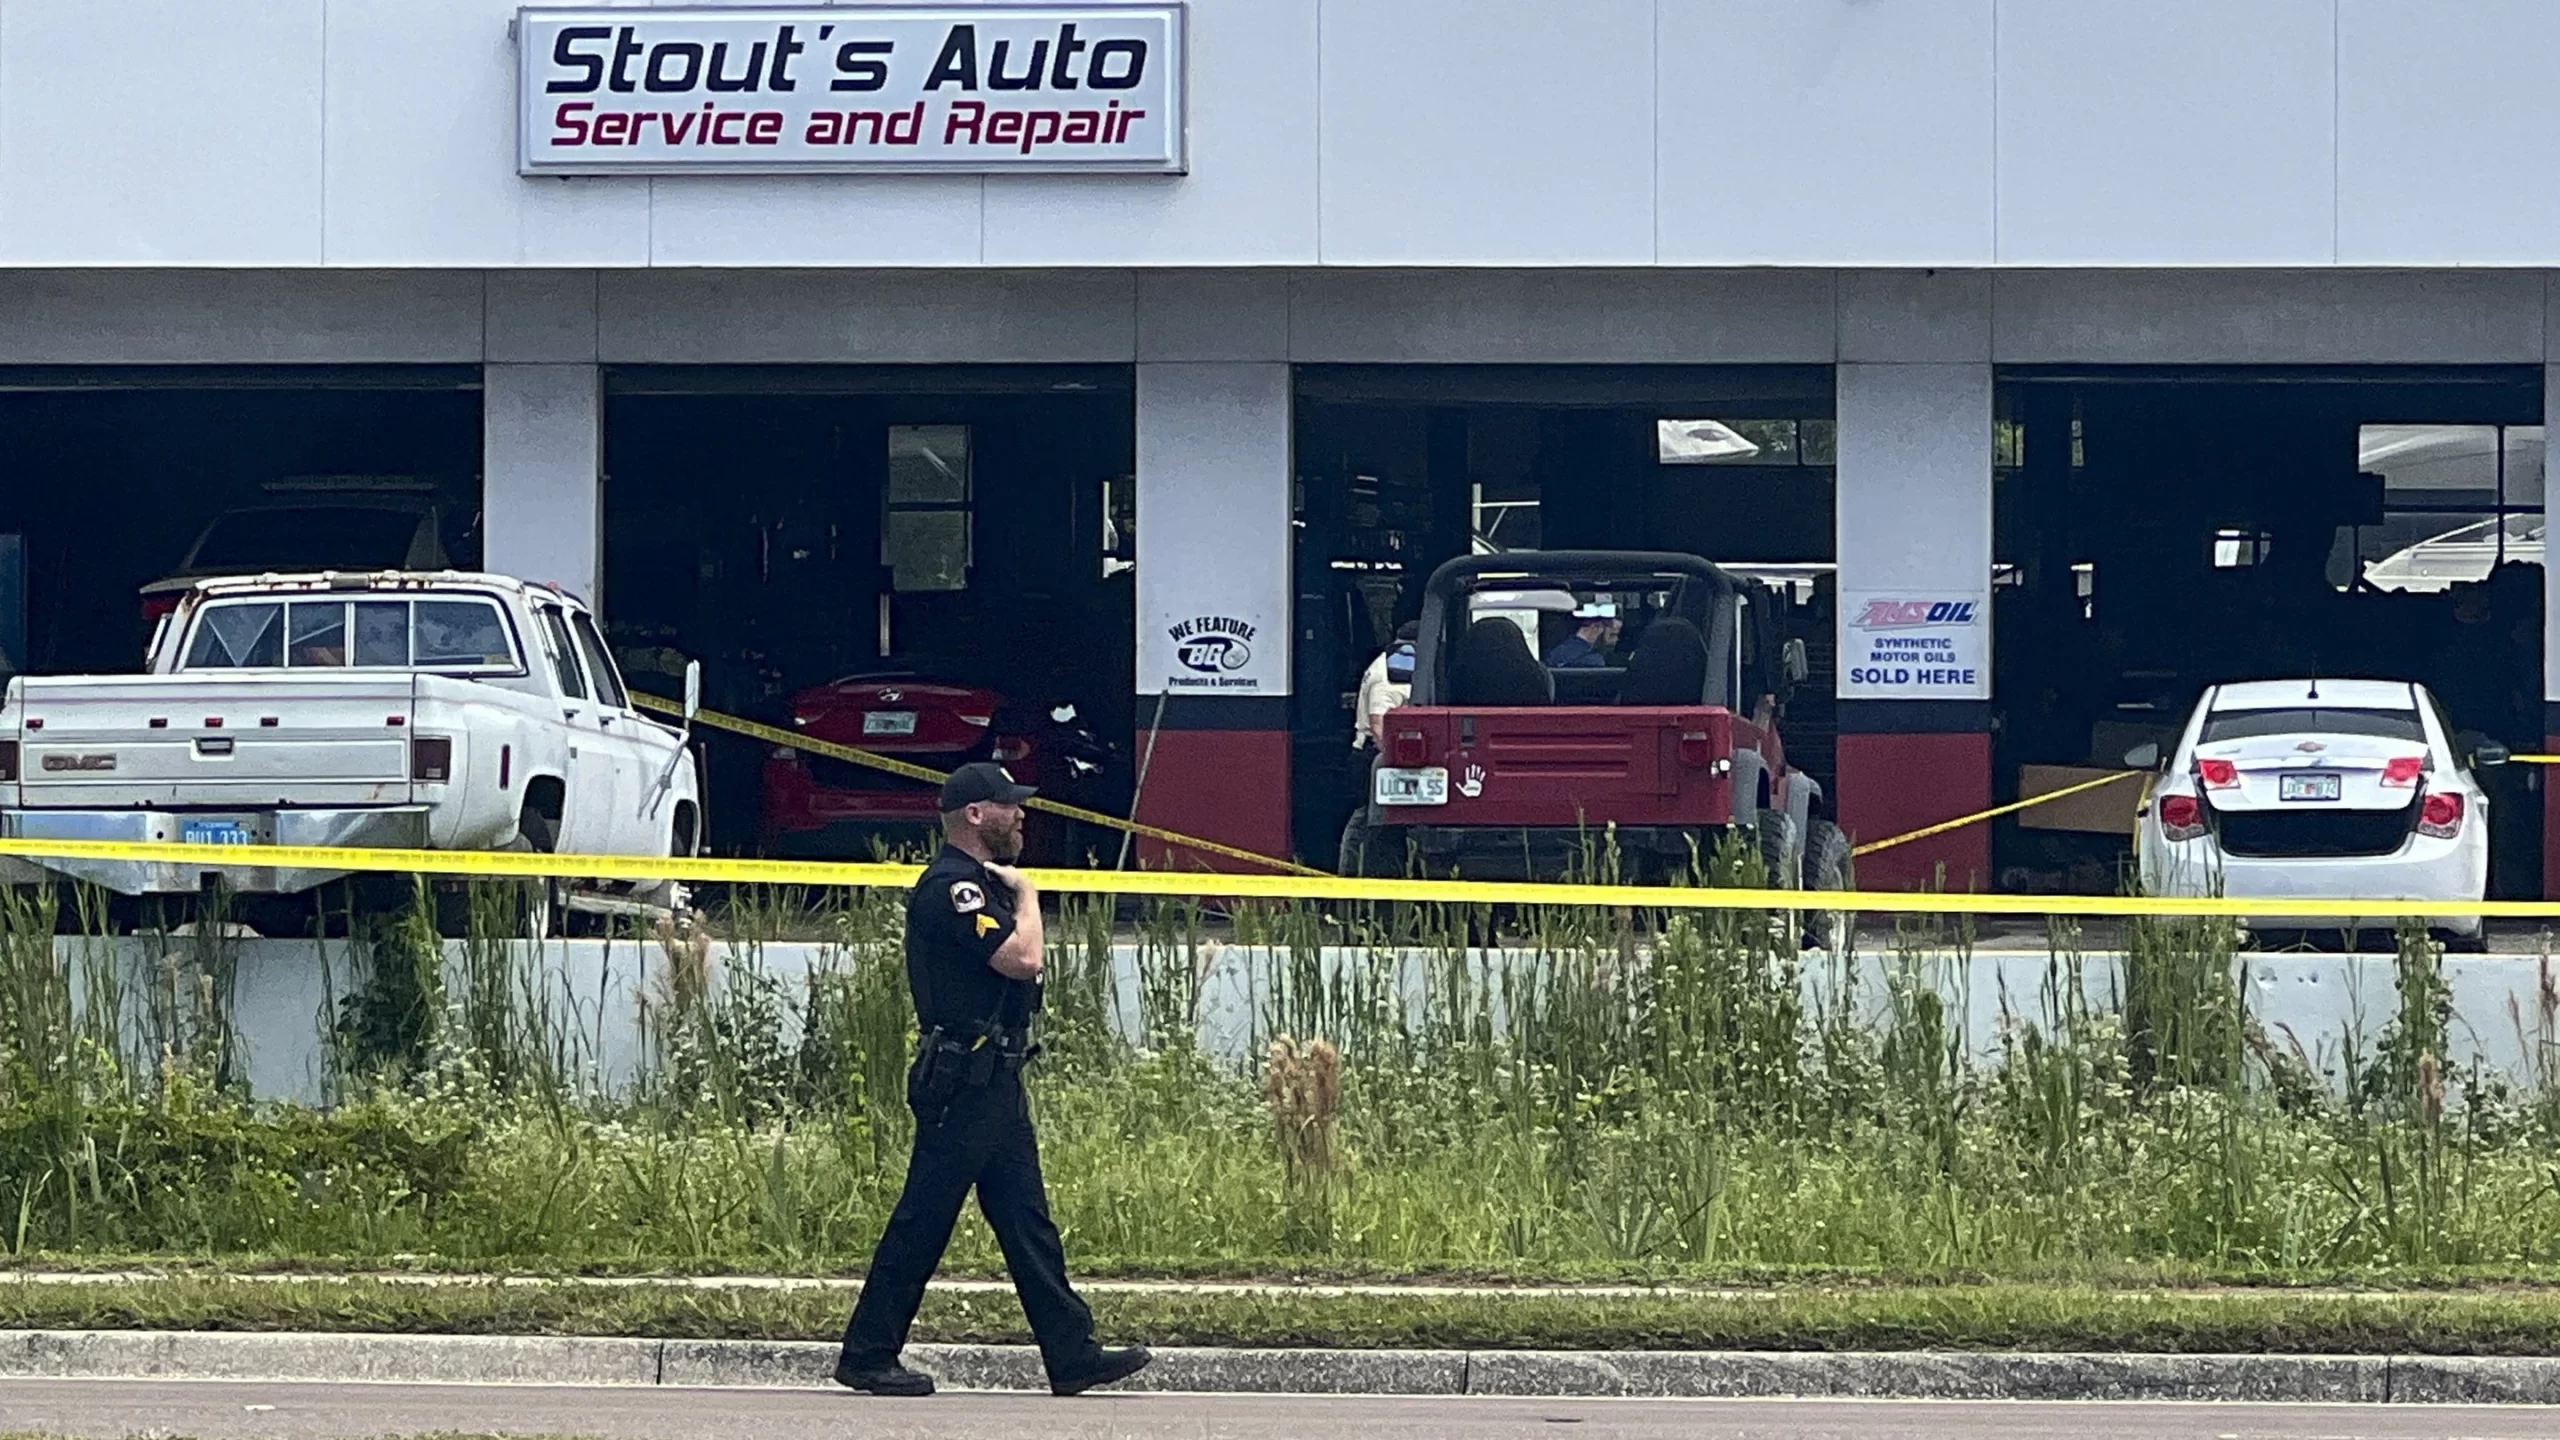 Florida auto shop owner and angry customer shot each other to death, police say